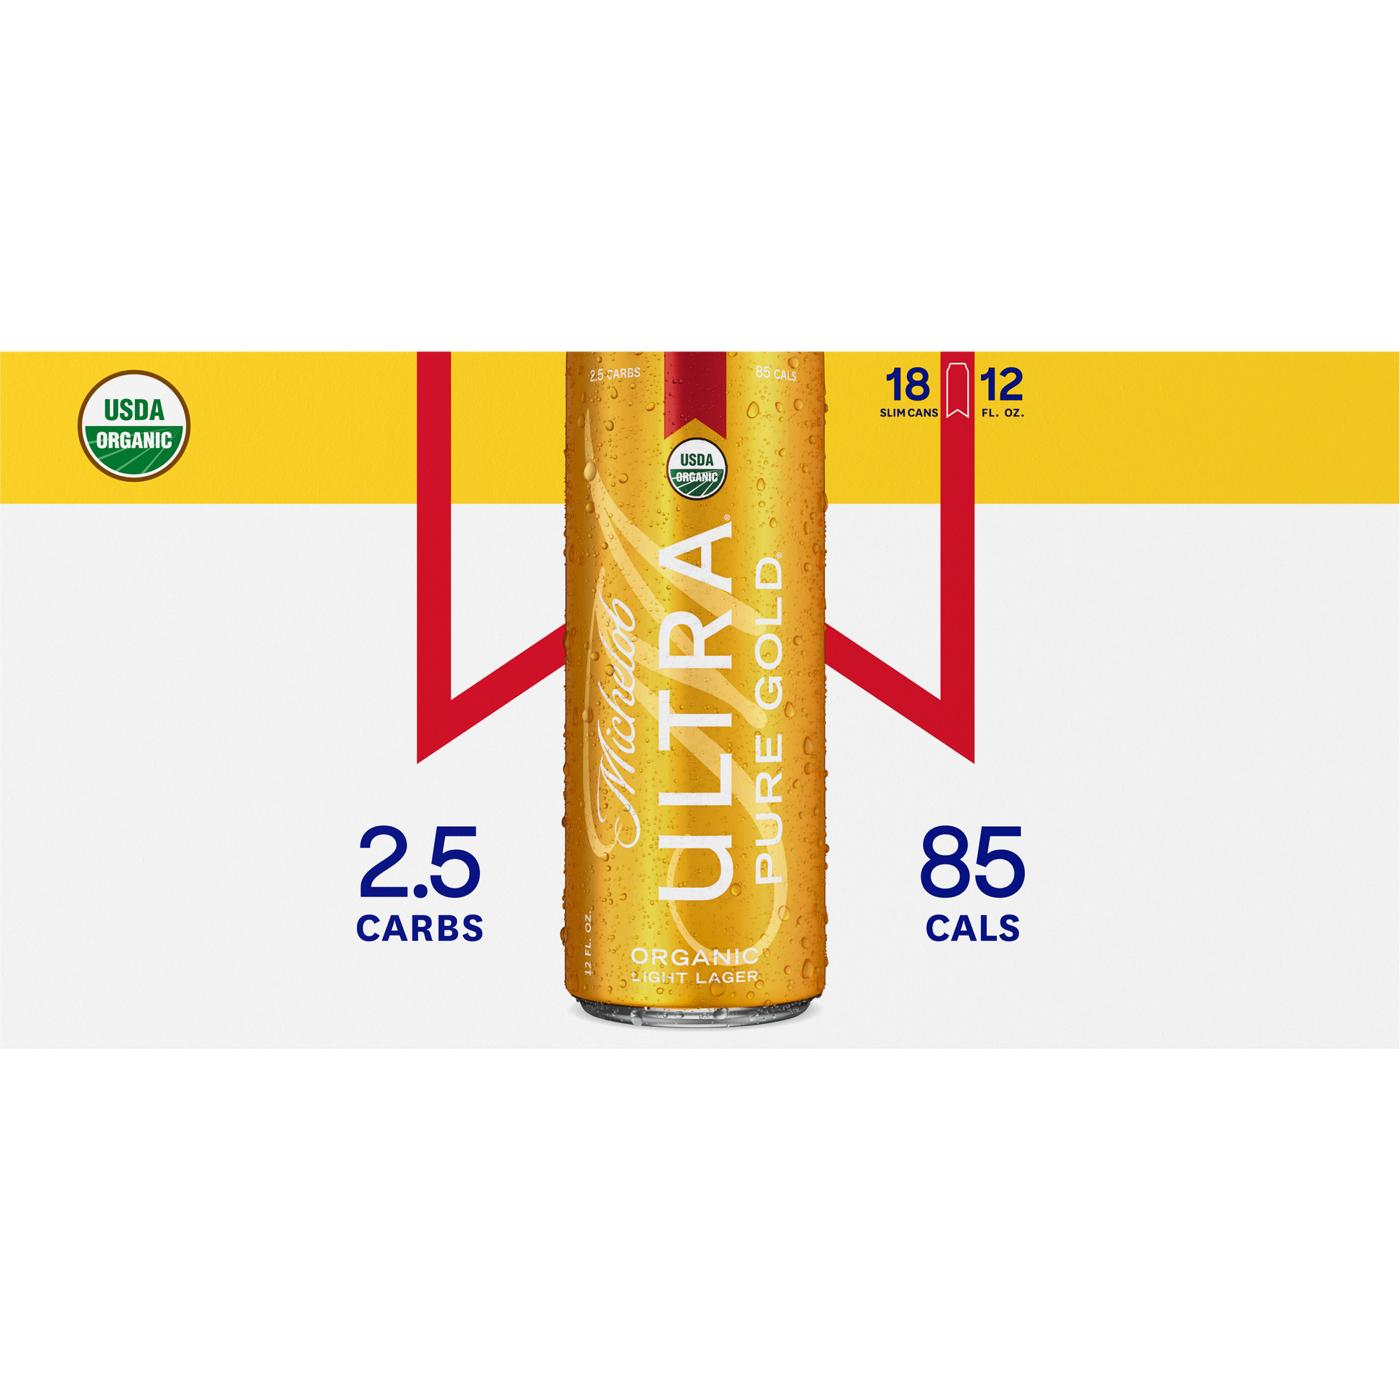 Michelob Ultra Pure Gold Organic Light Lager Beer 12 oz Cans; image 2 of 2